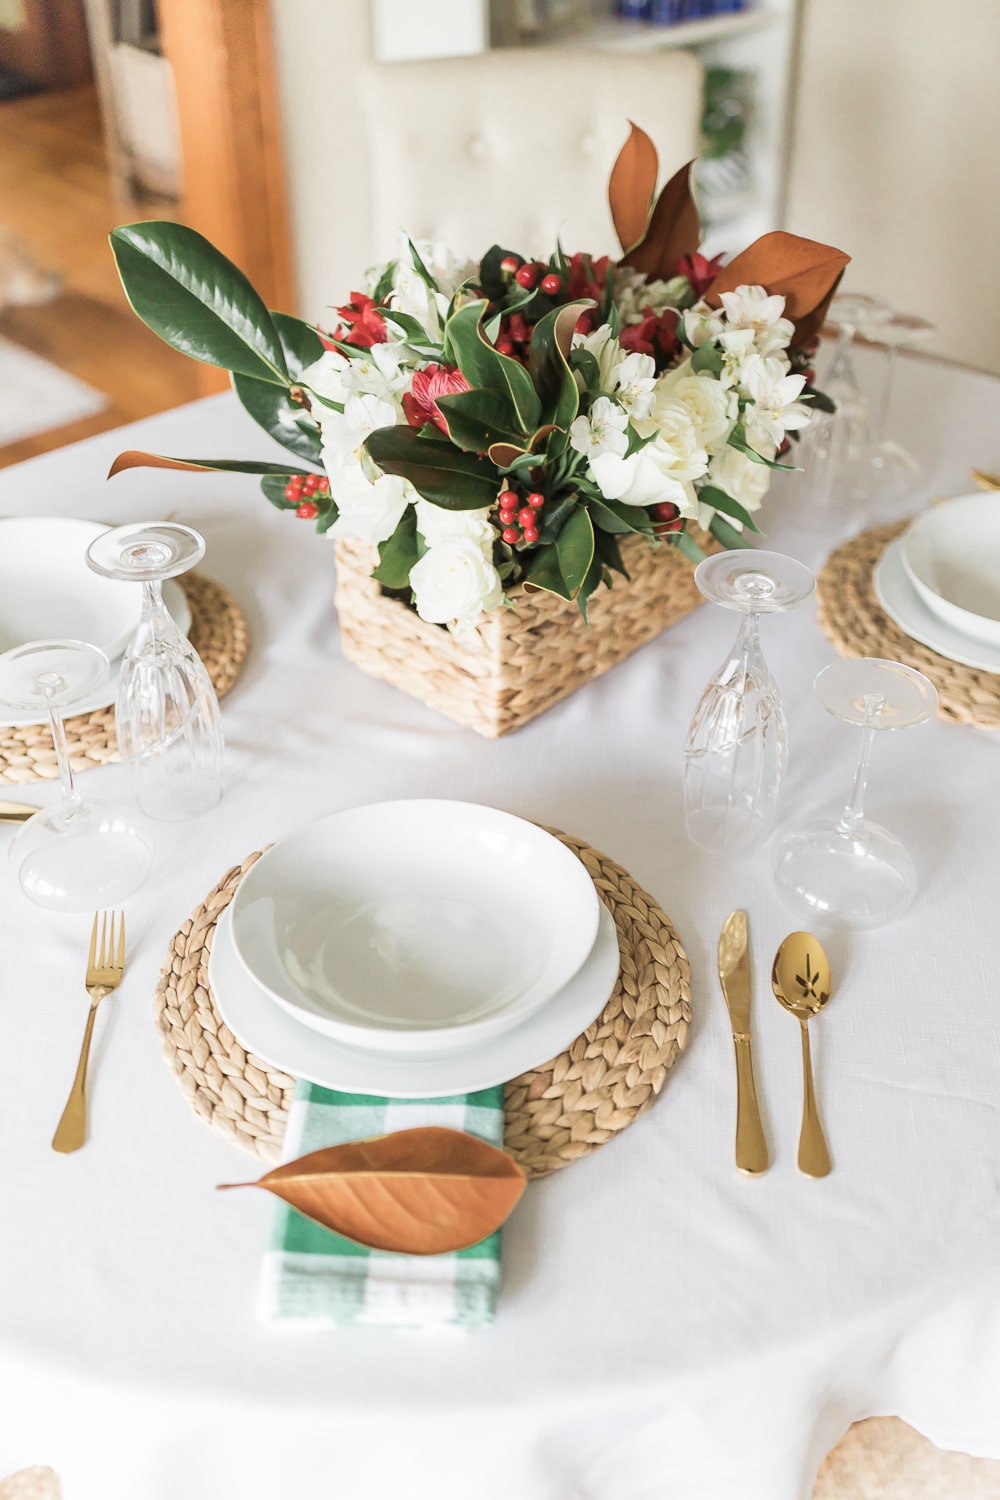 Simple fall tablescape ideas and DIY Thanksgiving flower arrangement tutorial from blogger Stephanie Ziajka on Diary of a Debutante